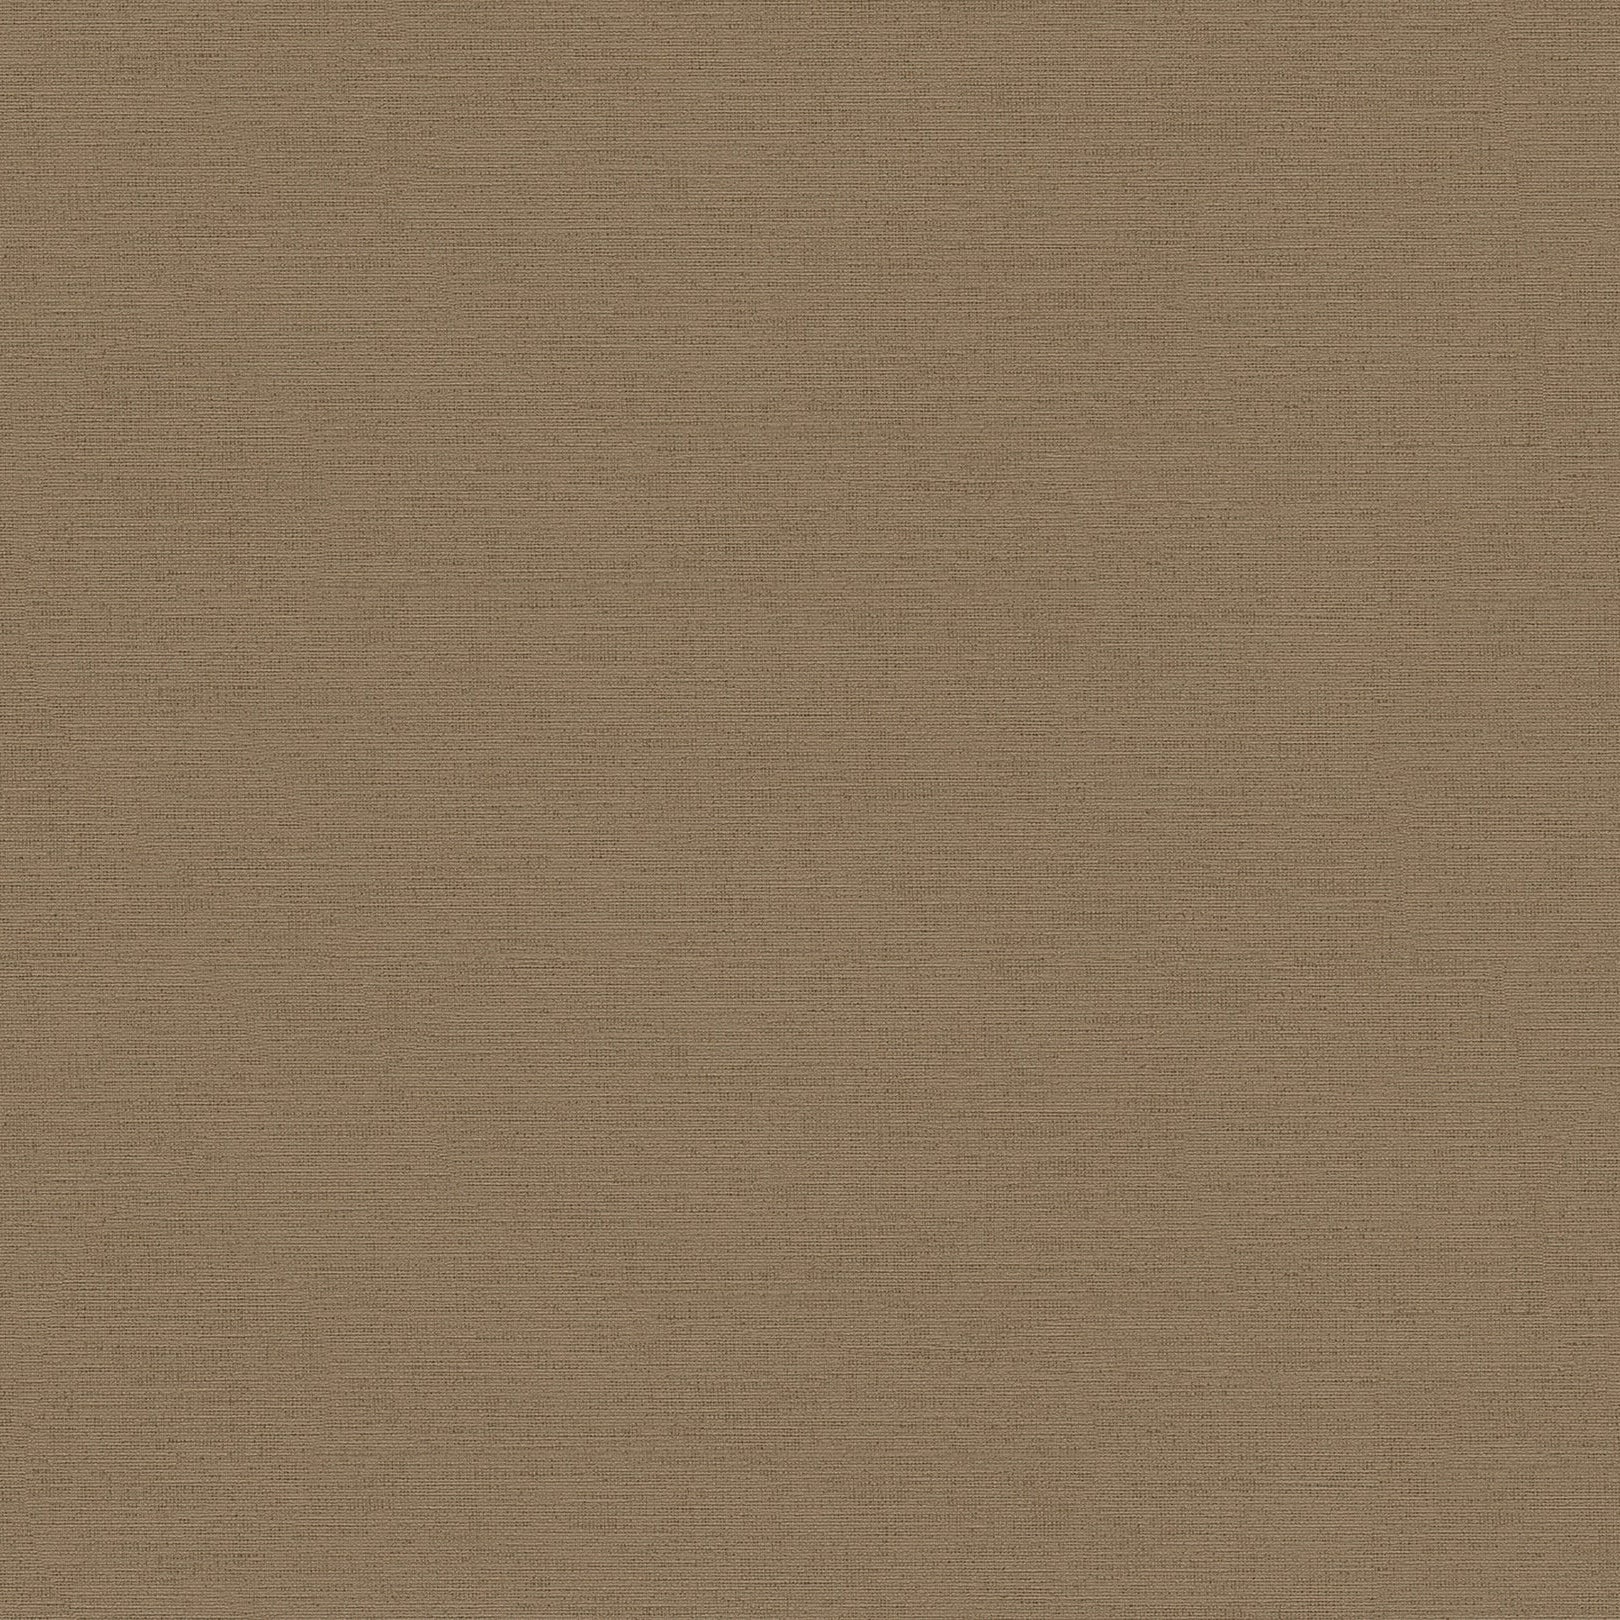 View 4044-30689-2 Cuba Canseco Brown Distressed Texture Wallpaper Brown by Advantage